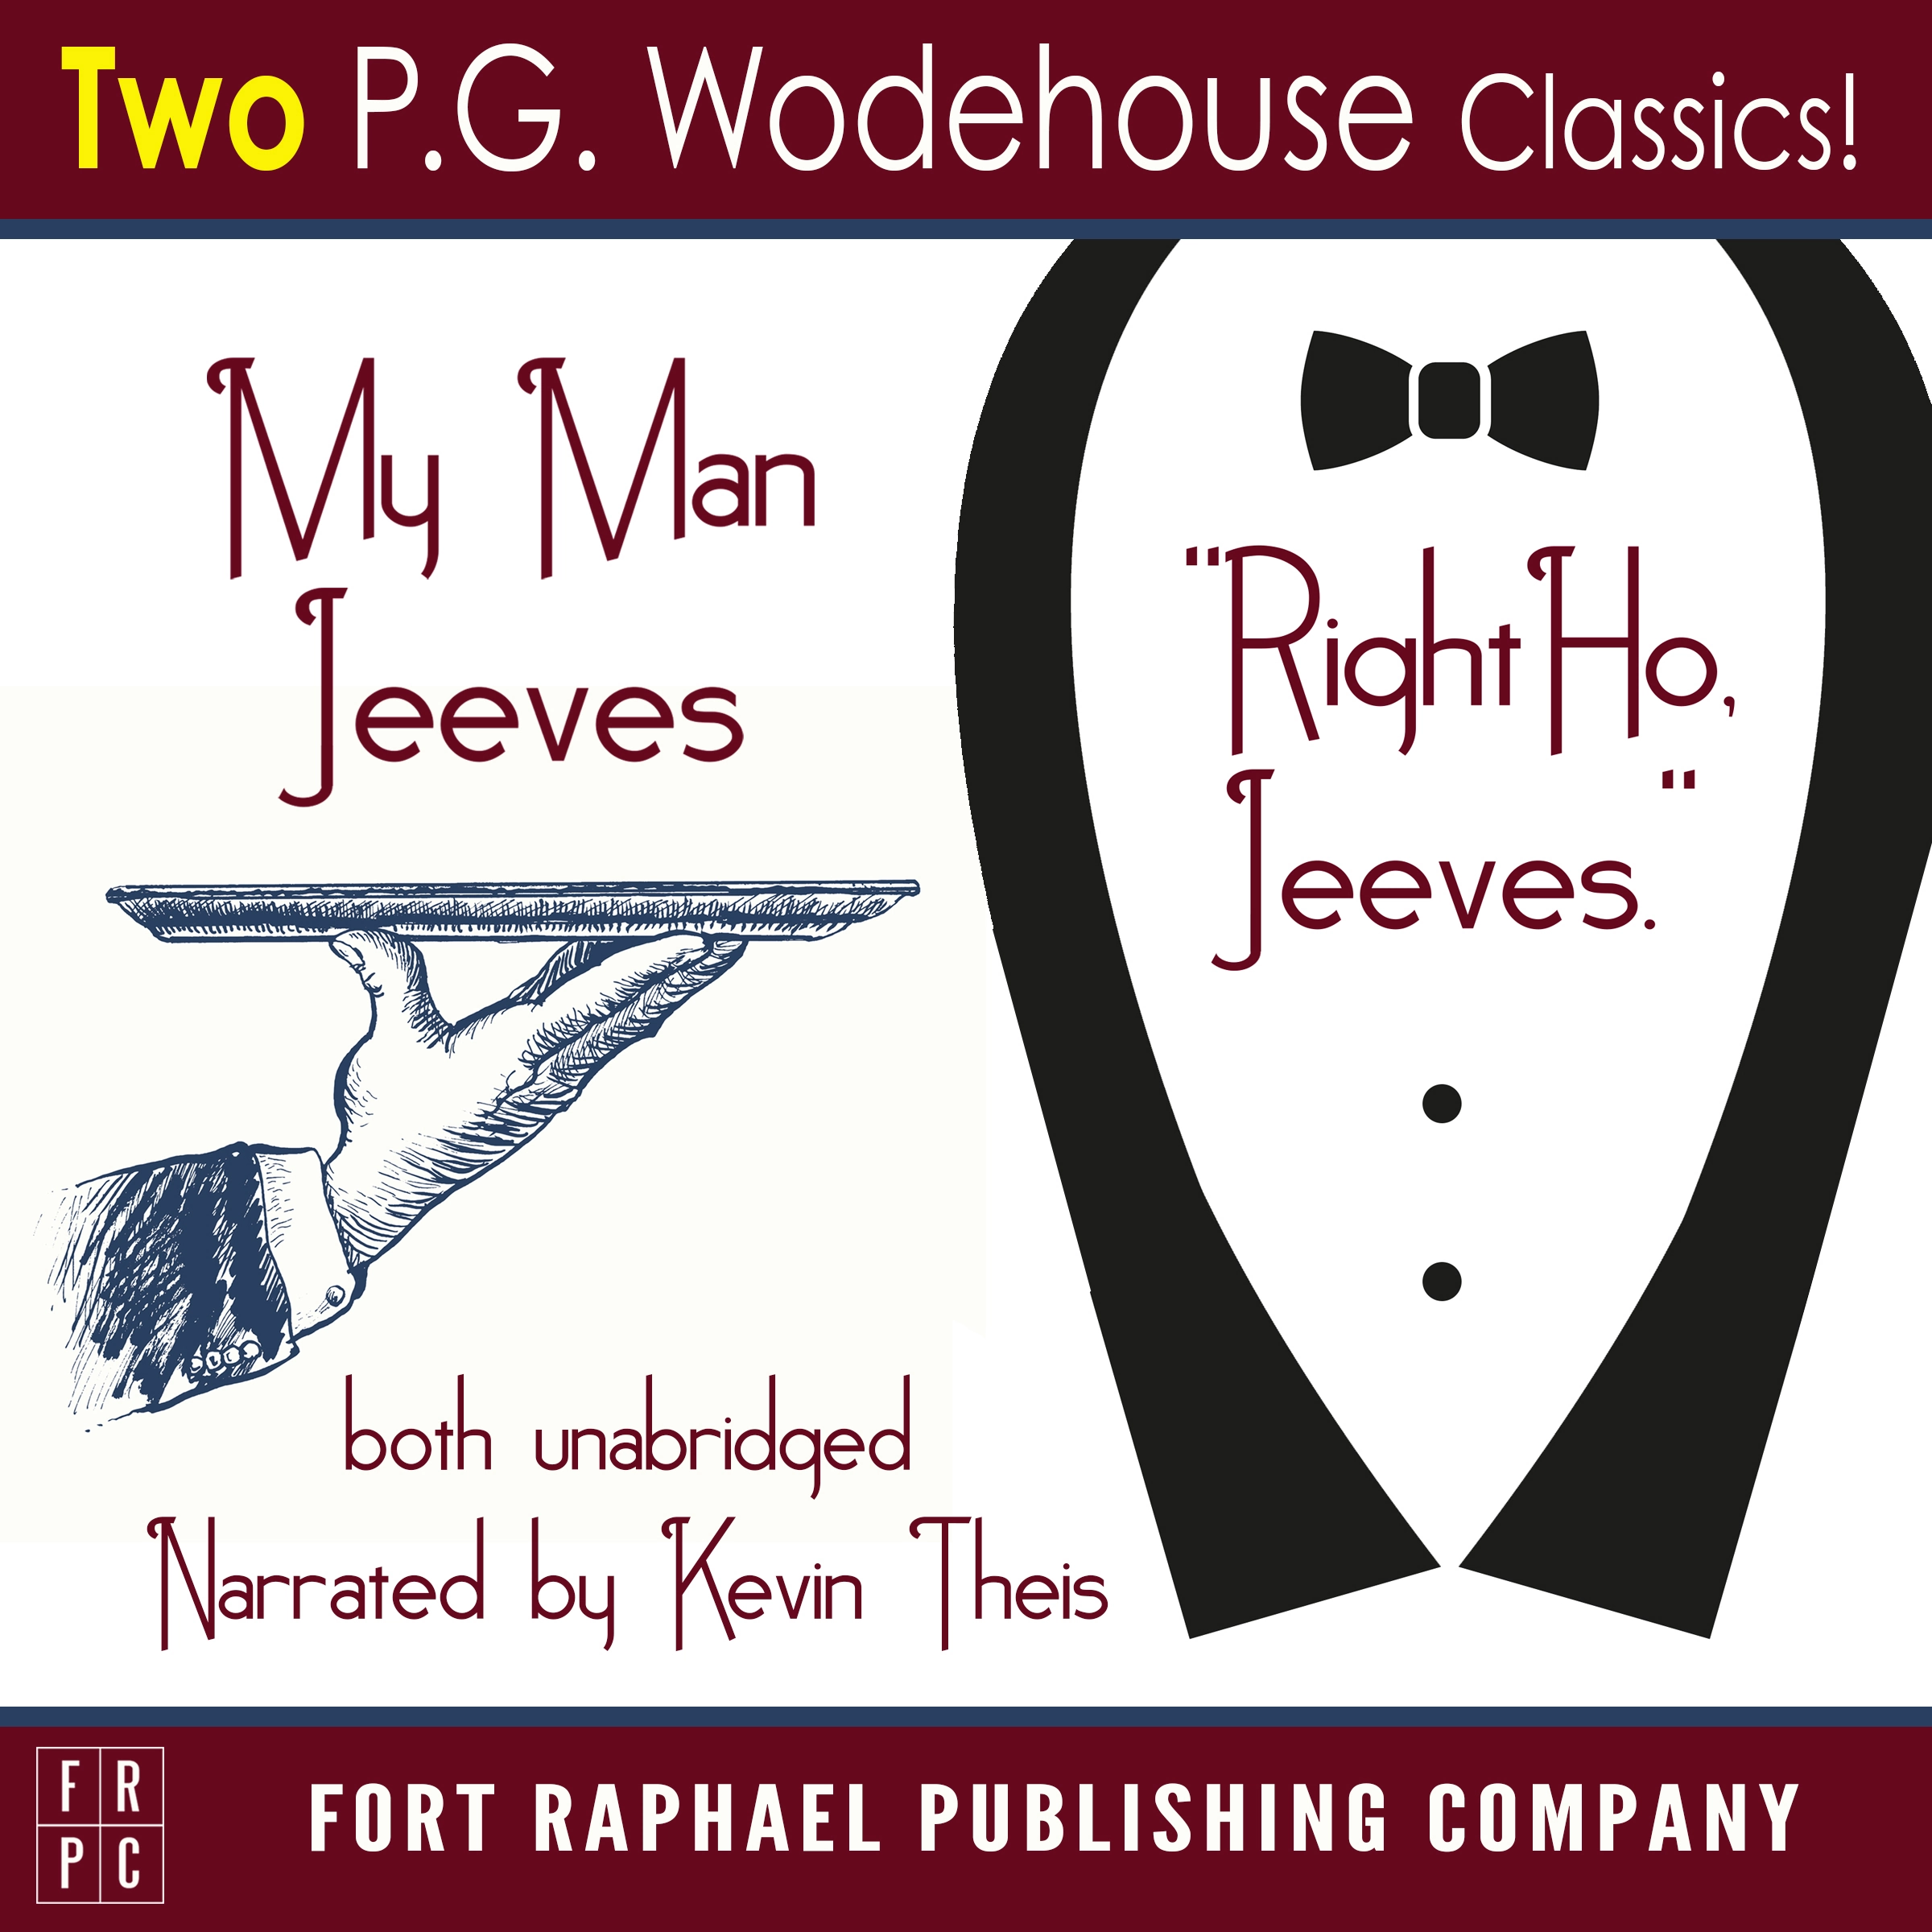 My Man Jeeves and Right Ho, Jeeves - Unabridged Audiobook by P.G. Wodehouse